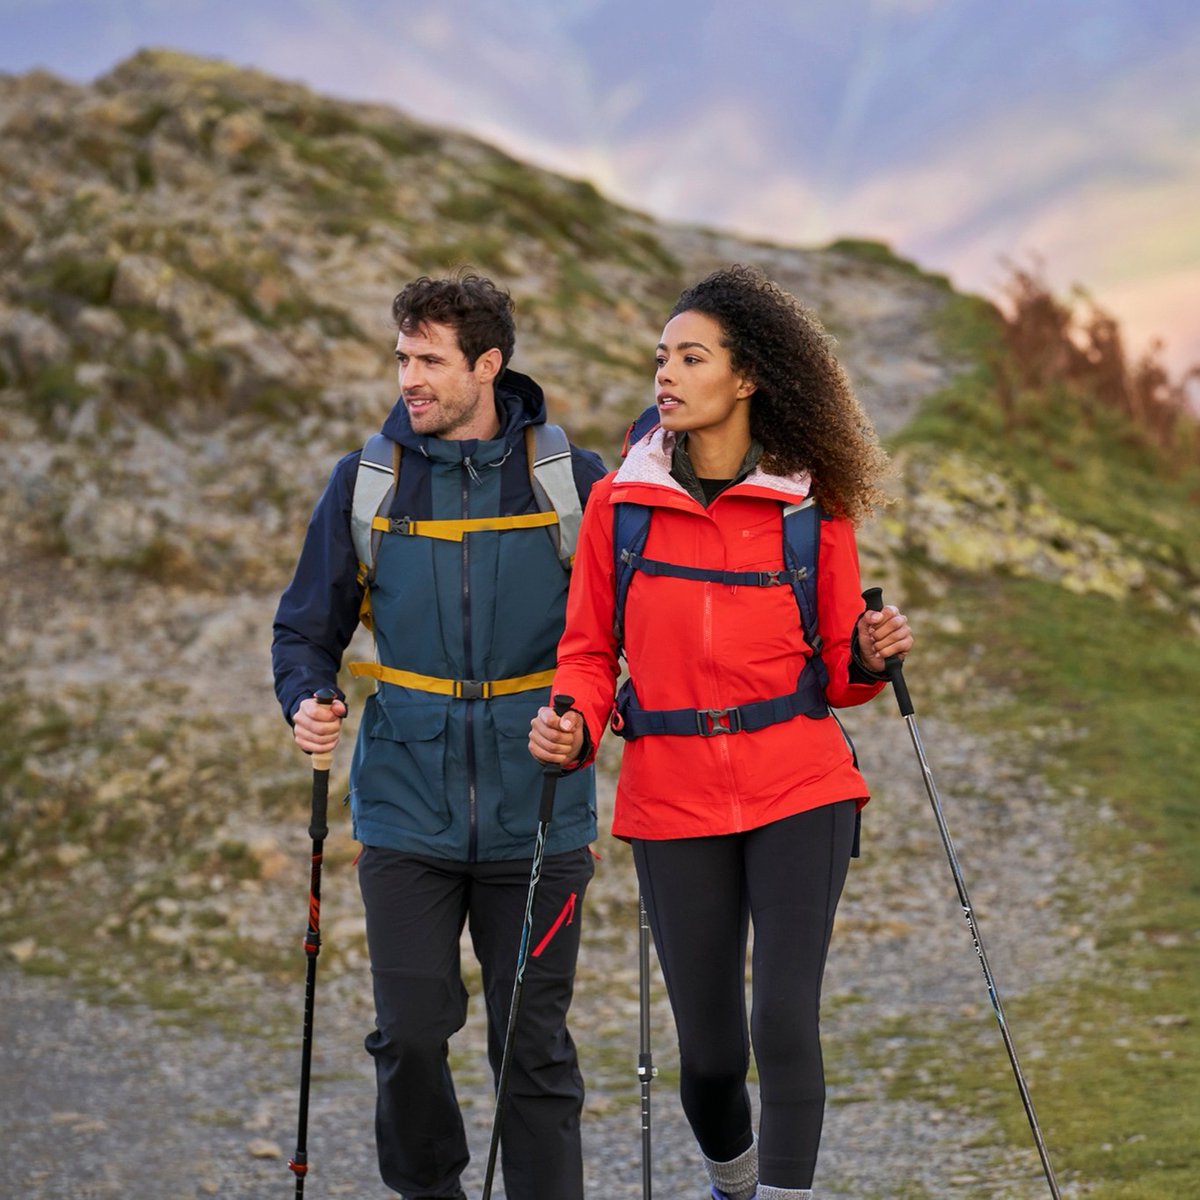 Don't miss out on Bank Holiday savings at @MountainWHouse 🛍️ 

Enjoy an extra 20% off EVERYTHING until Tuesday 7th May. Get prepped for your next outdoor adventure and discover clothing, boots, accessories and more! ⛰️